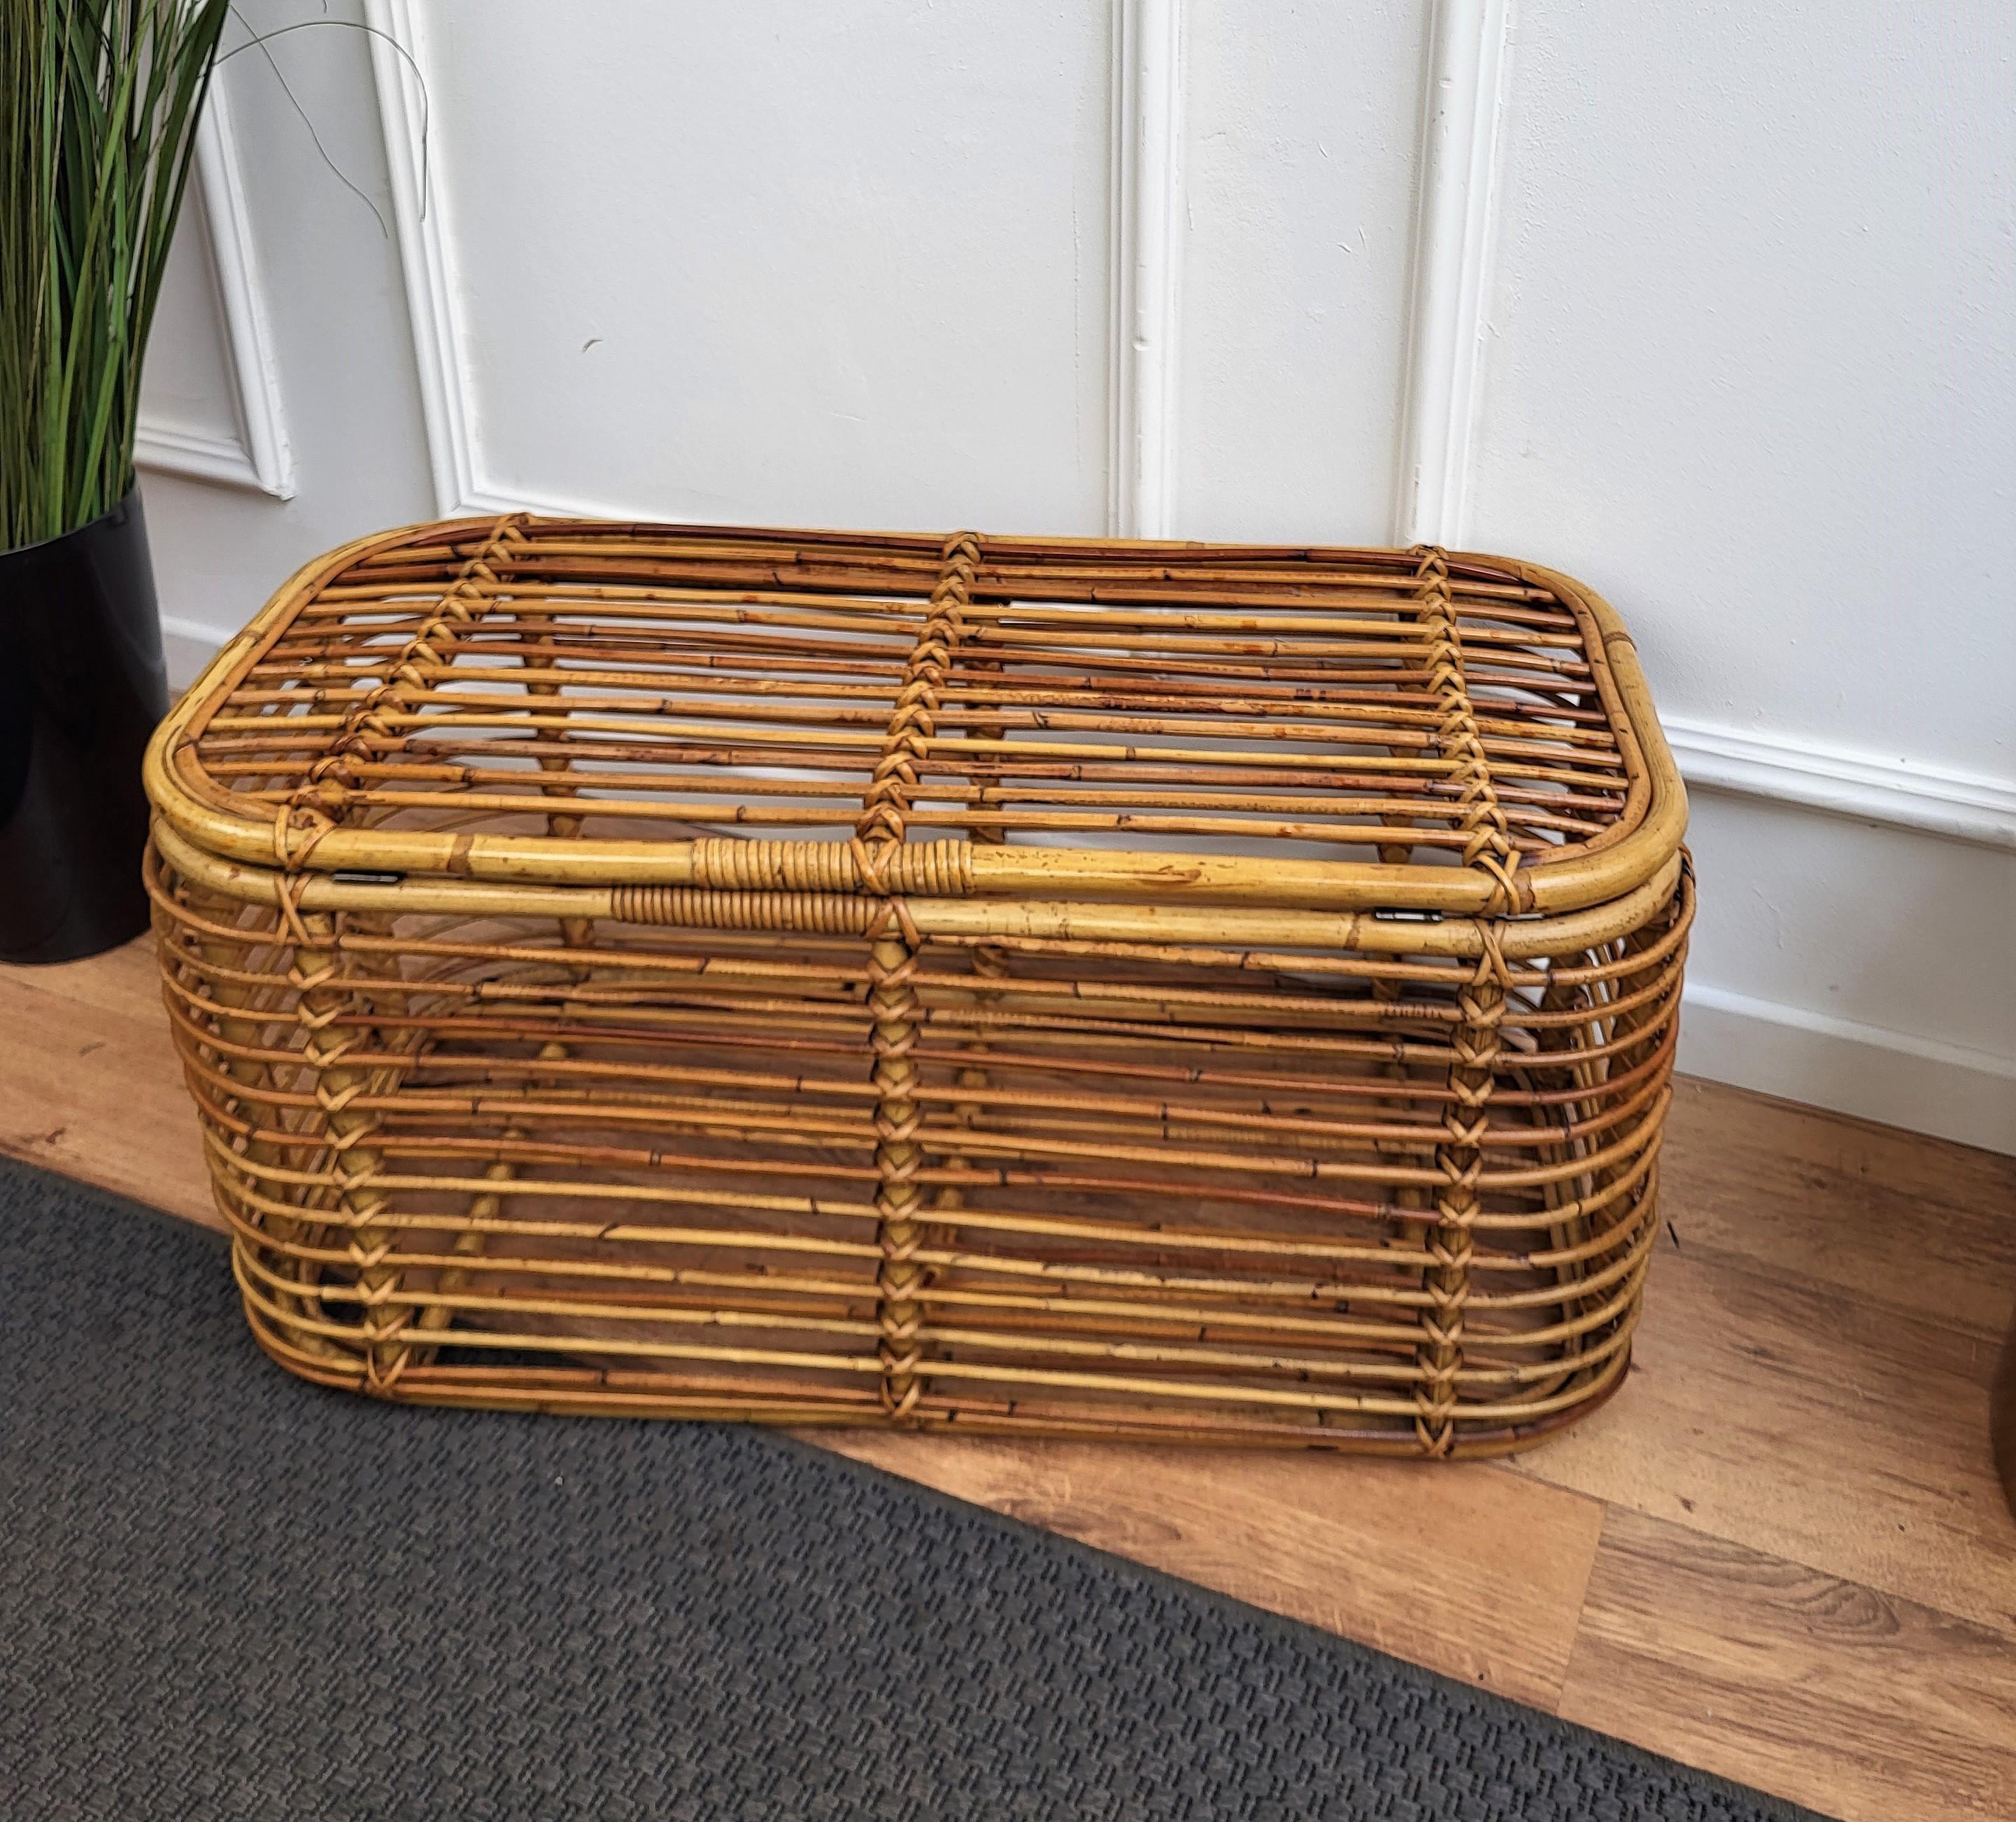 20th Century 1960s Italian Designer Bamboo Rattan Bohemian French Riviera Basket Container For Sale